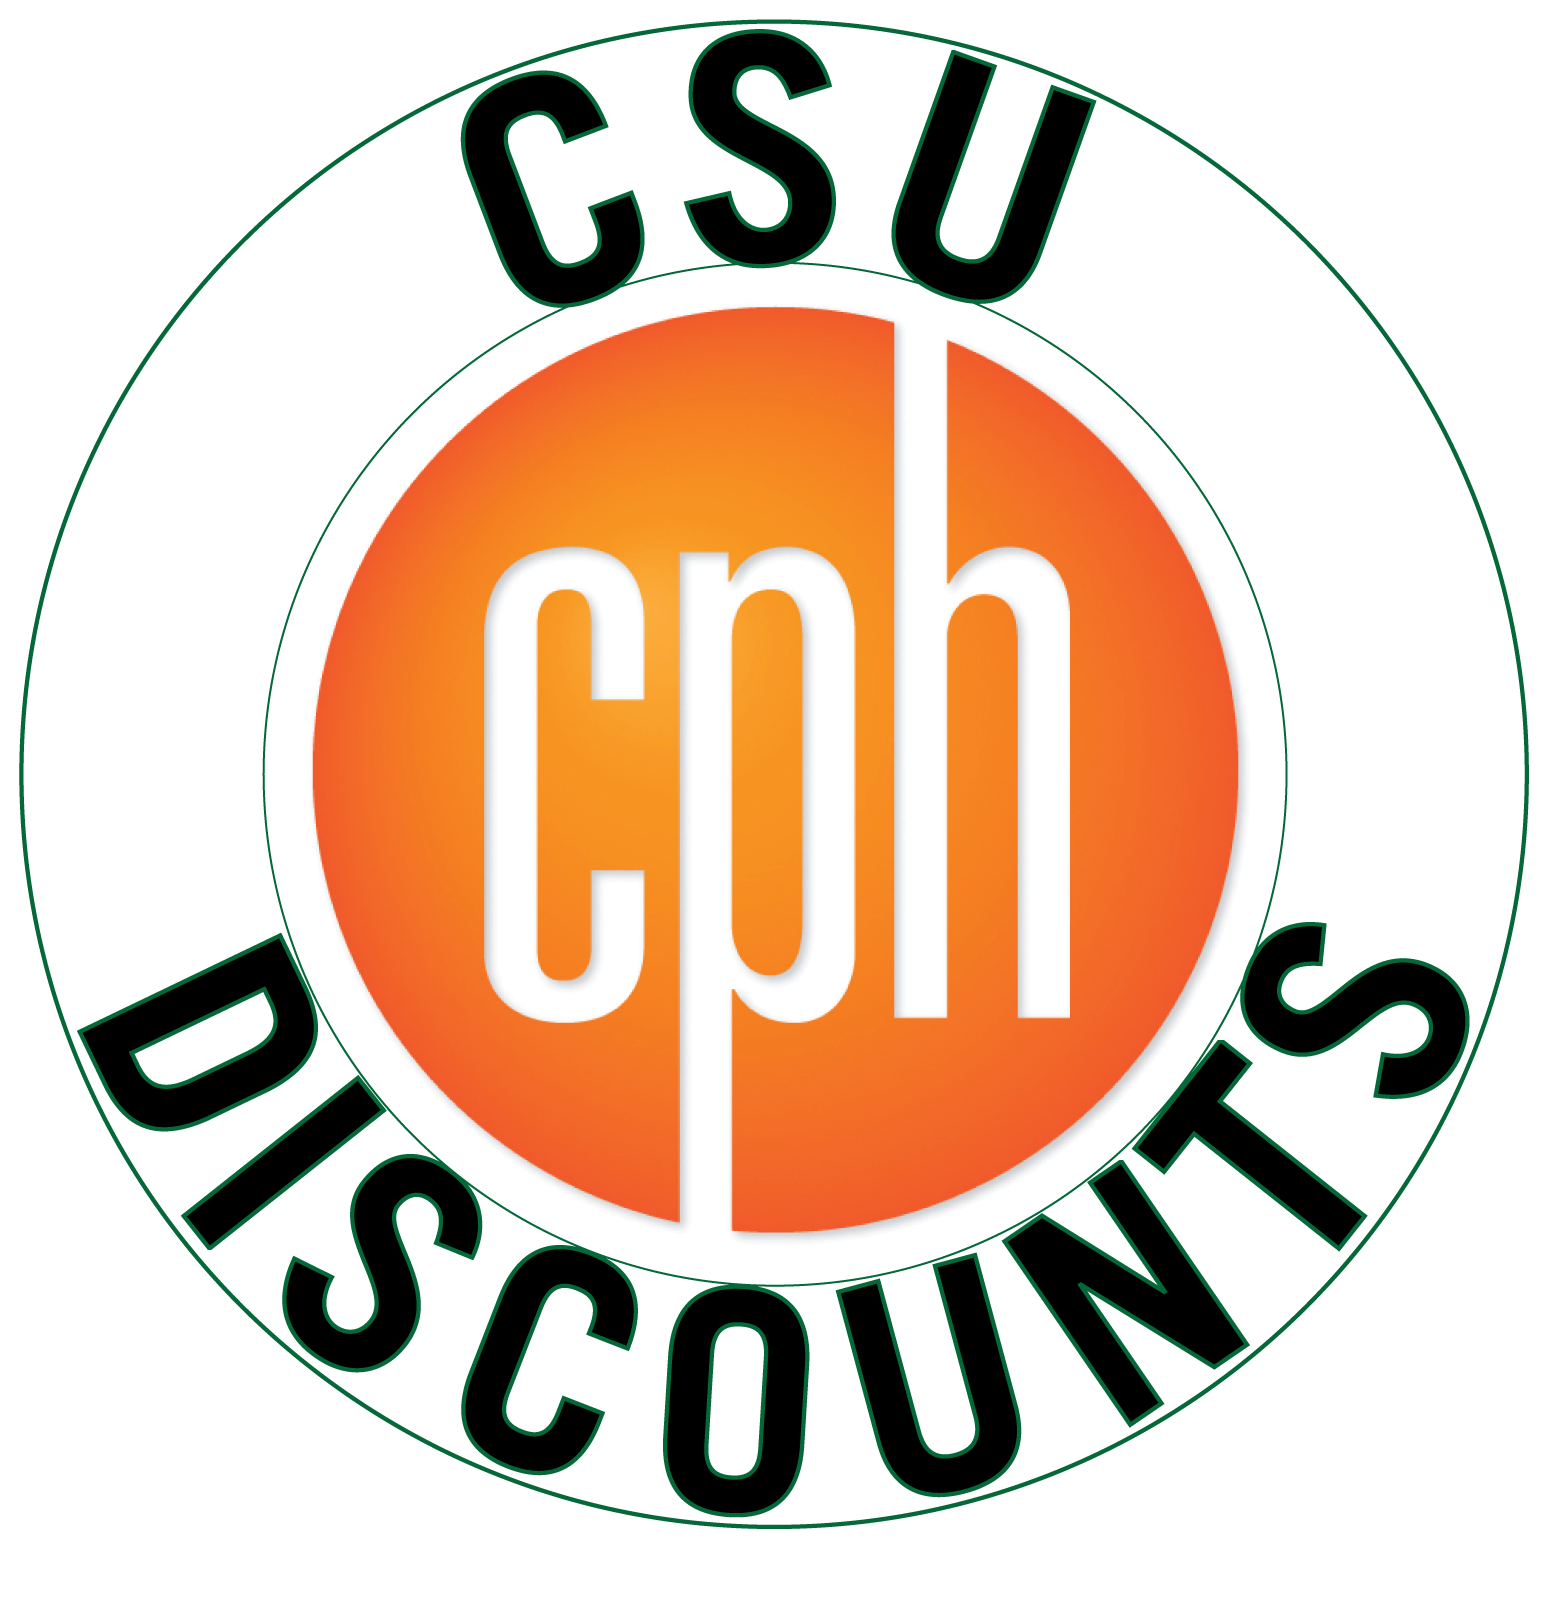 csu-discounts-at-cleveland-play-house-cleveland-state-university